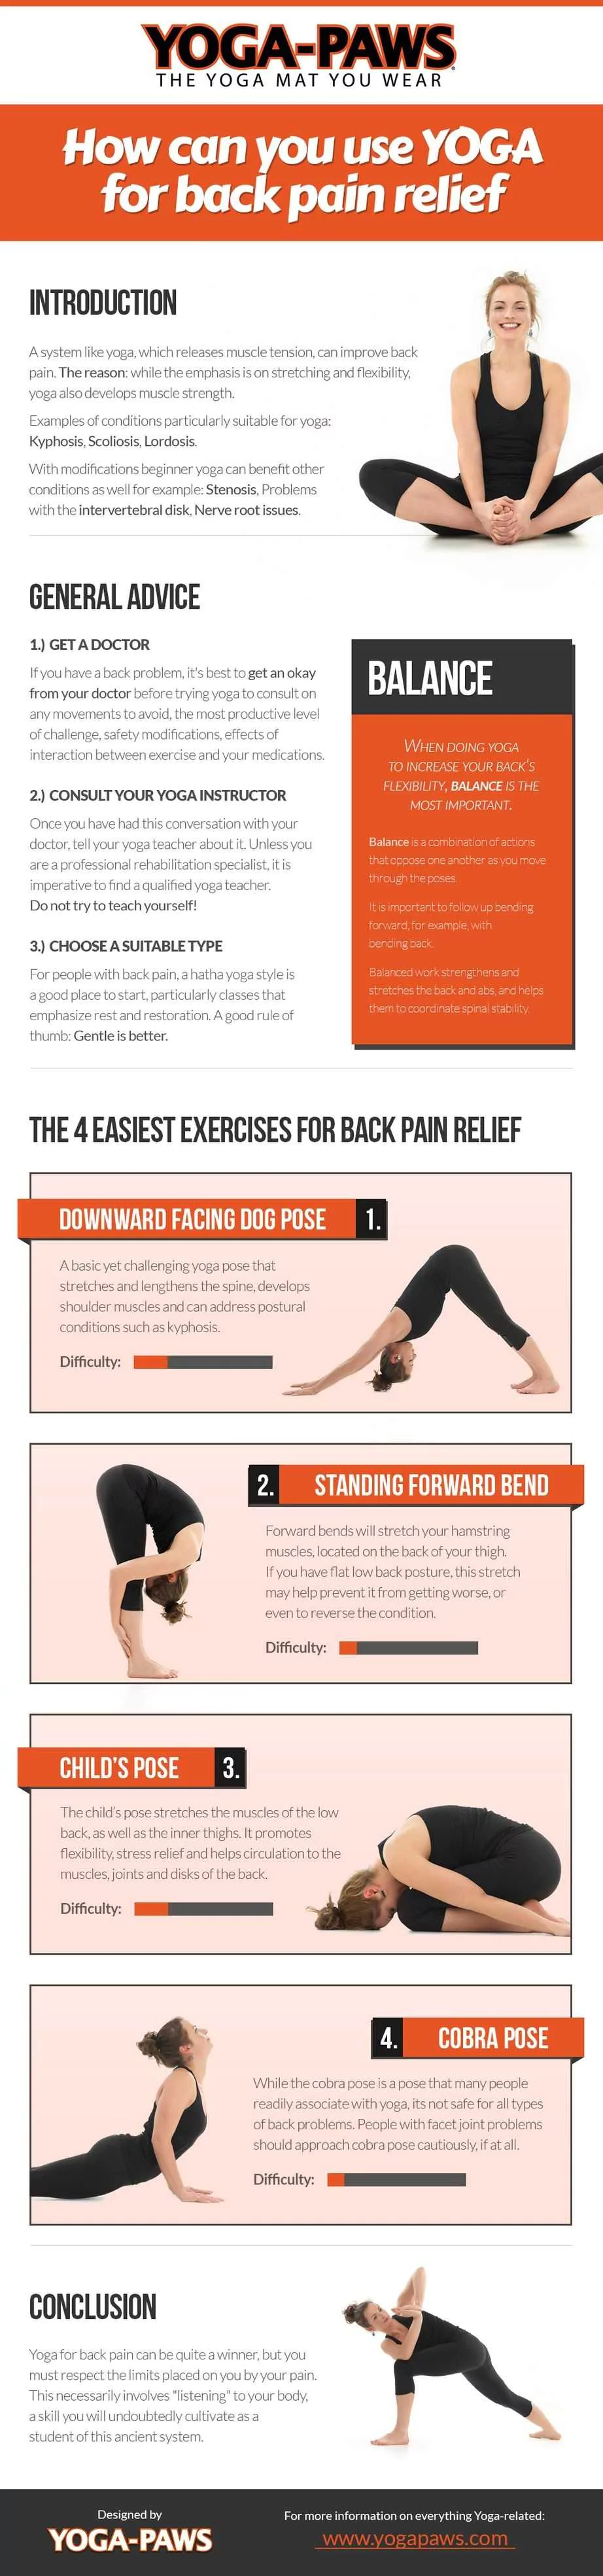 Yoga For Back Pain Relief